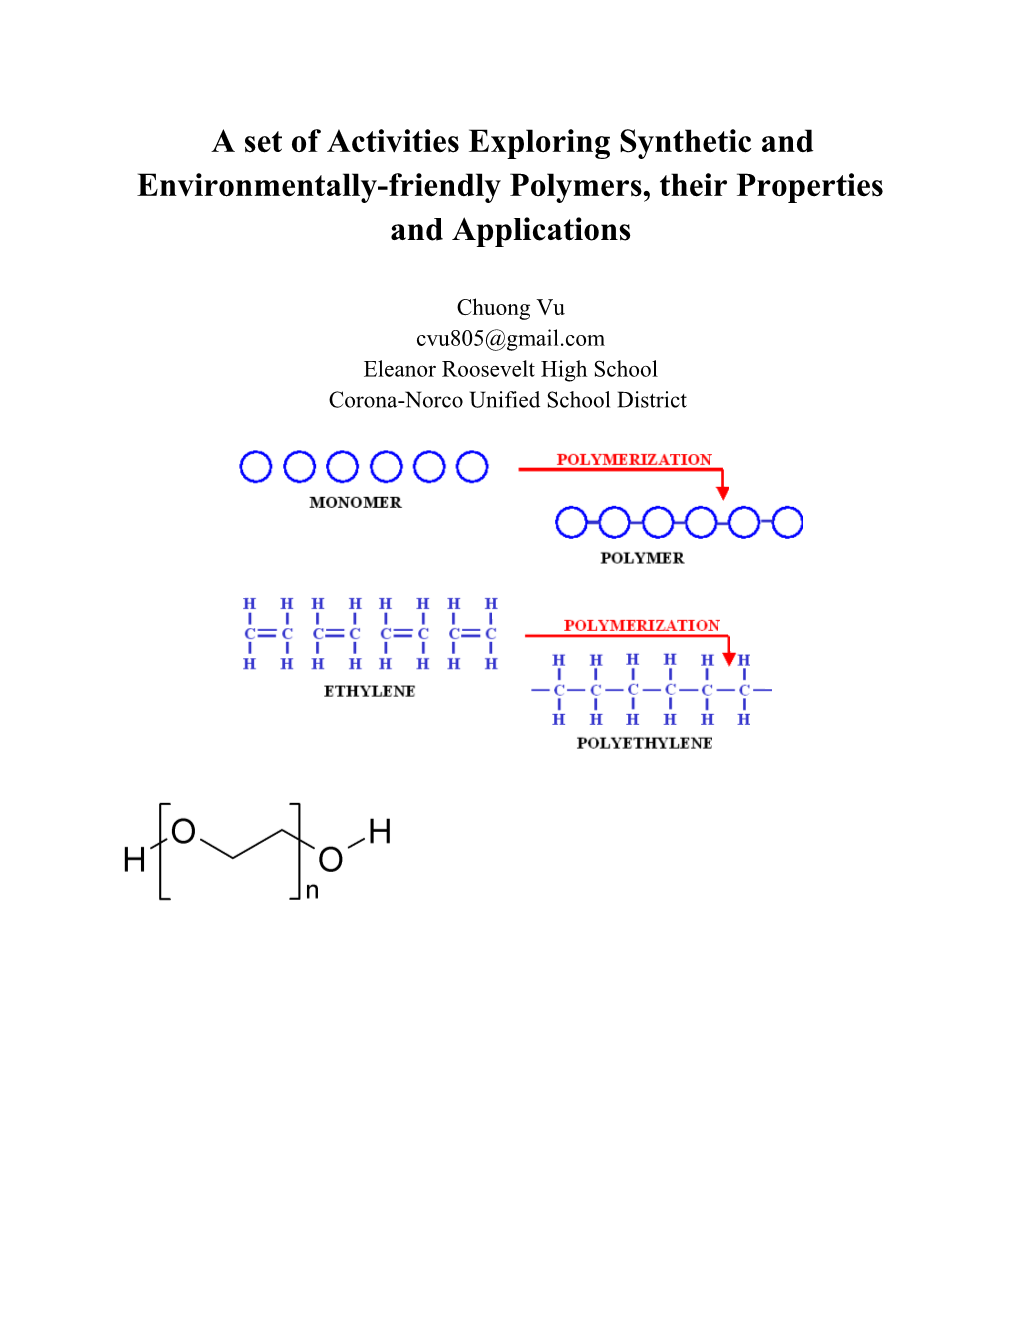 A Set of Activities Exploring Synthetic and Environmentally-Friendly Polymers, Their Properties